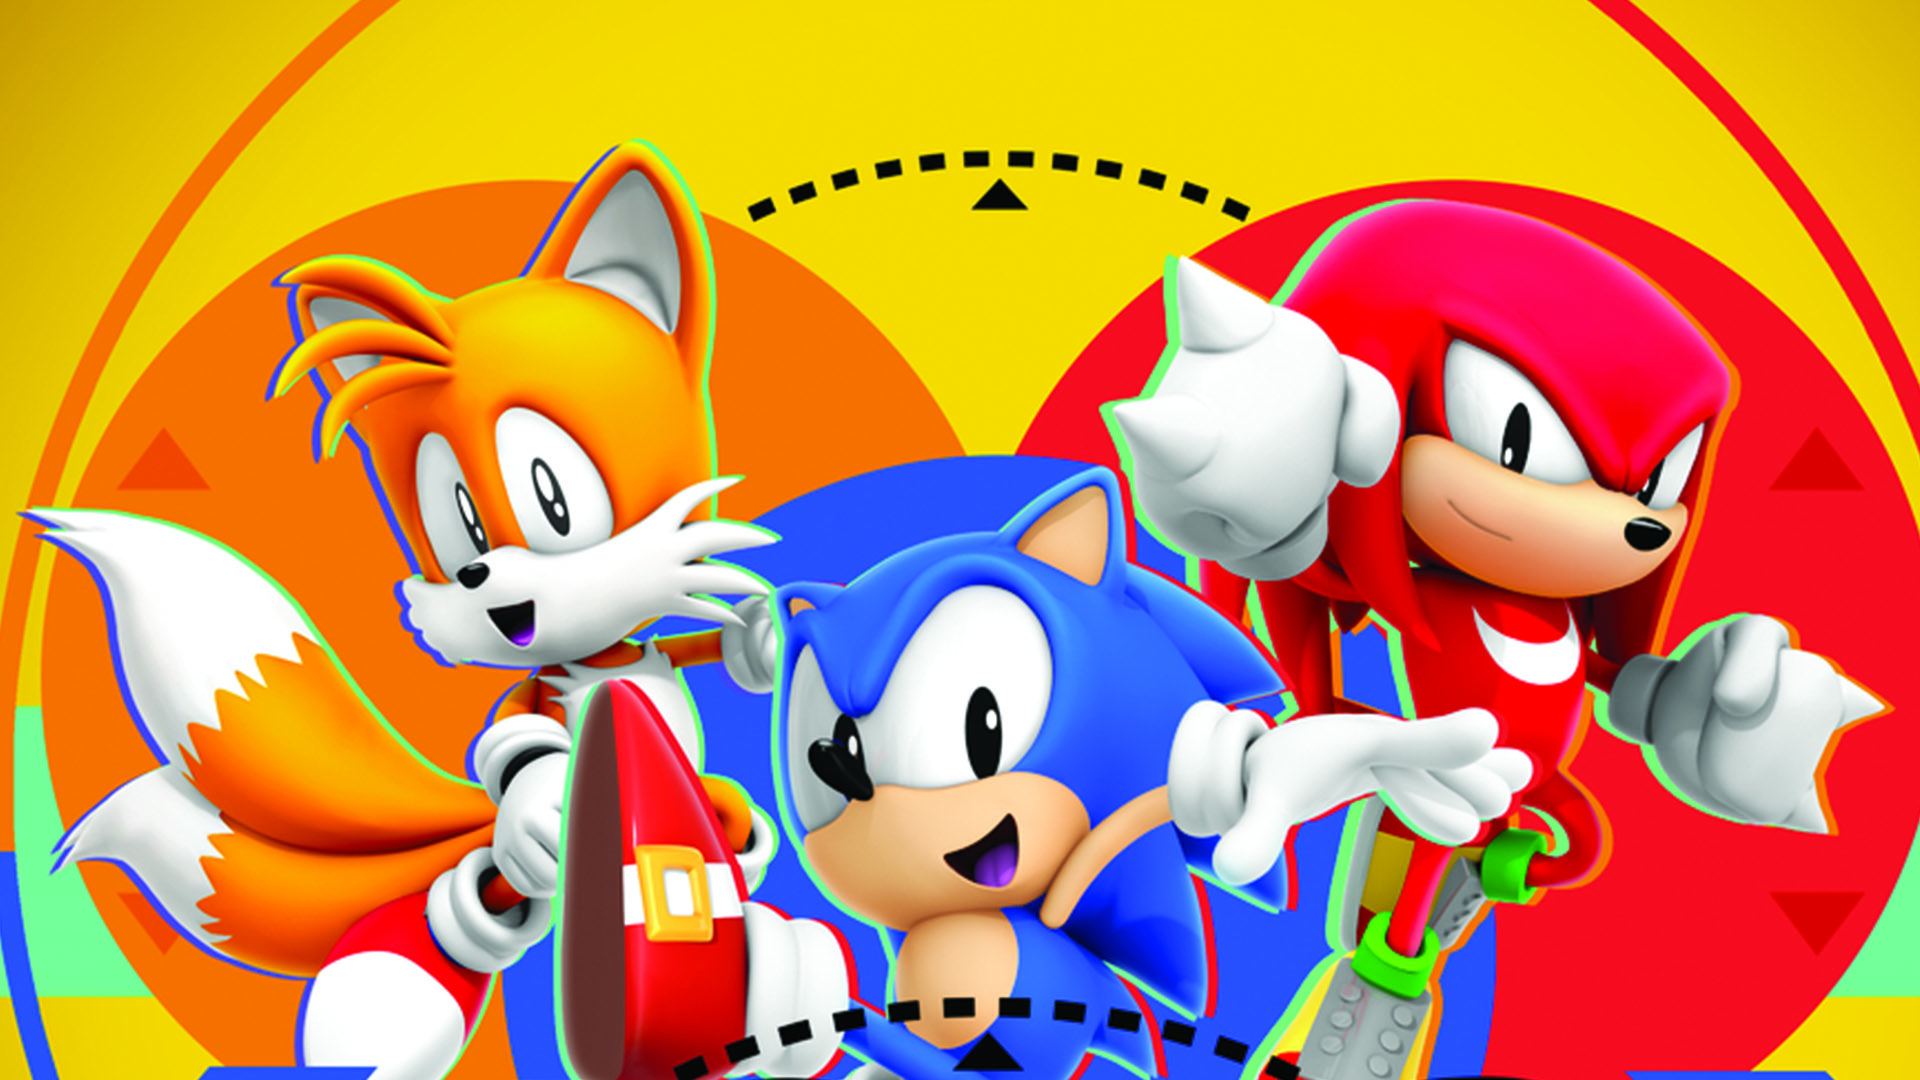 Humble Sonic Bundle is the perfect gift